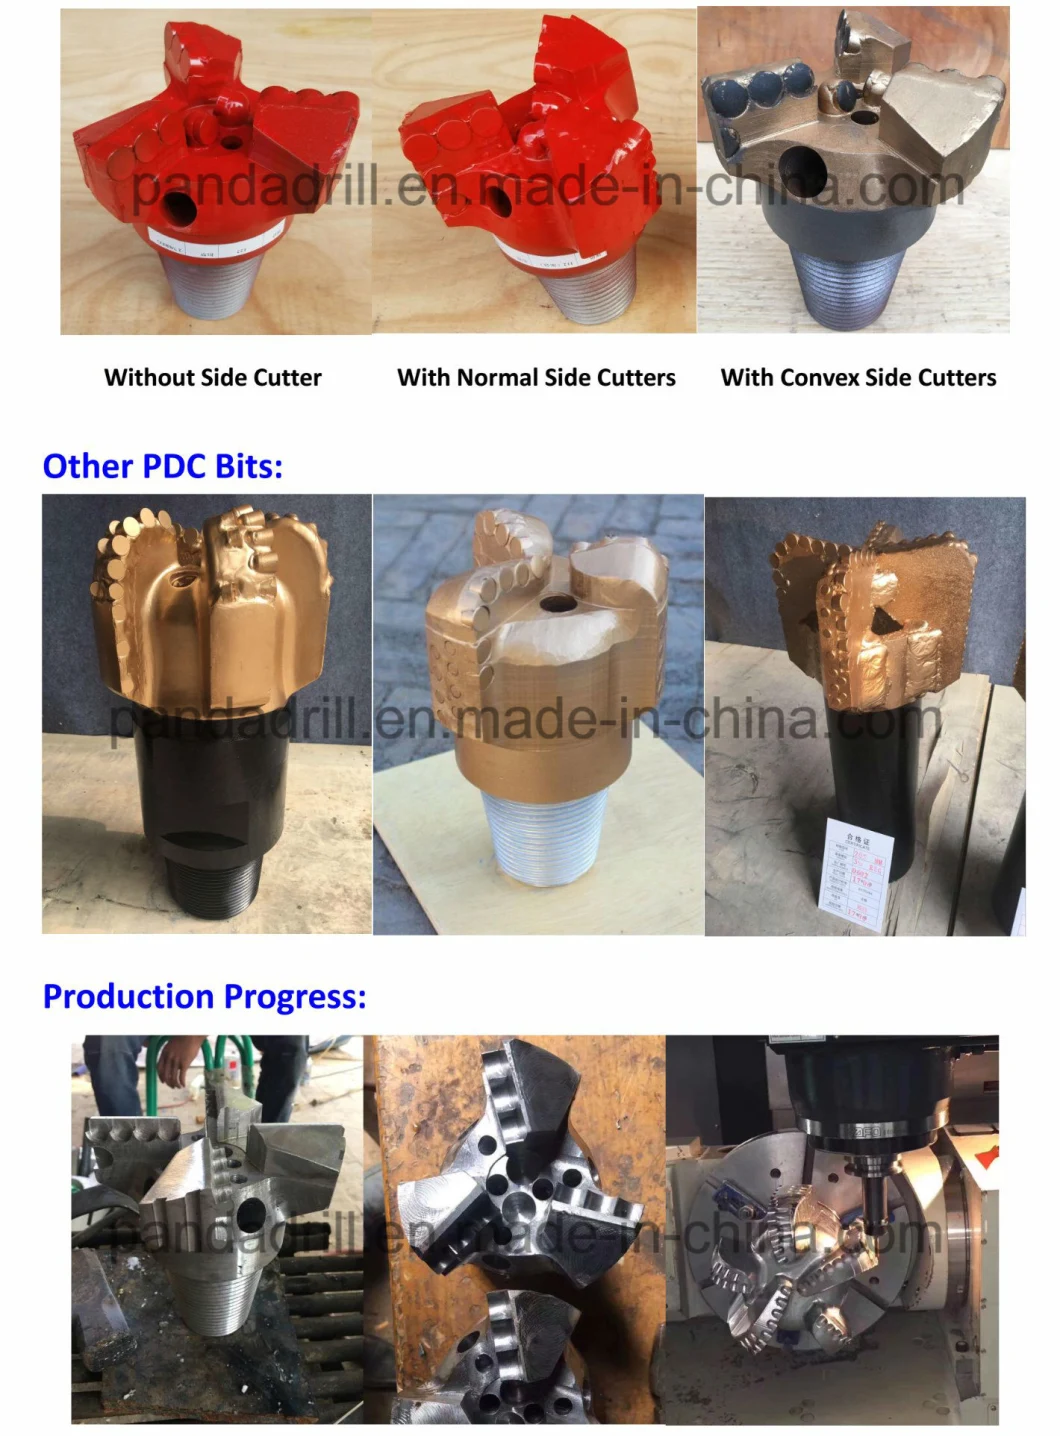 API PDC Drag Bit/ Bit for Water Well Drilling